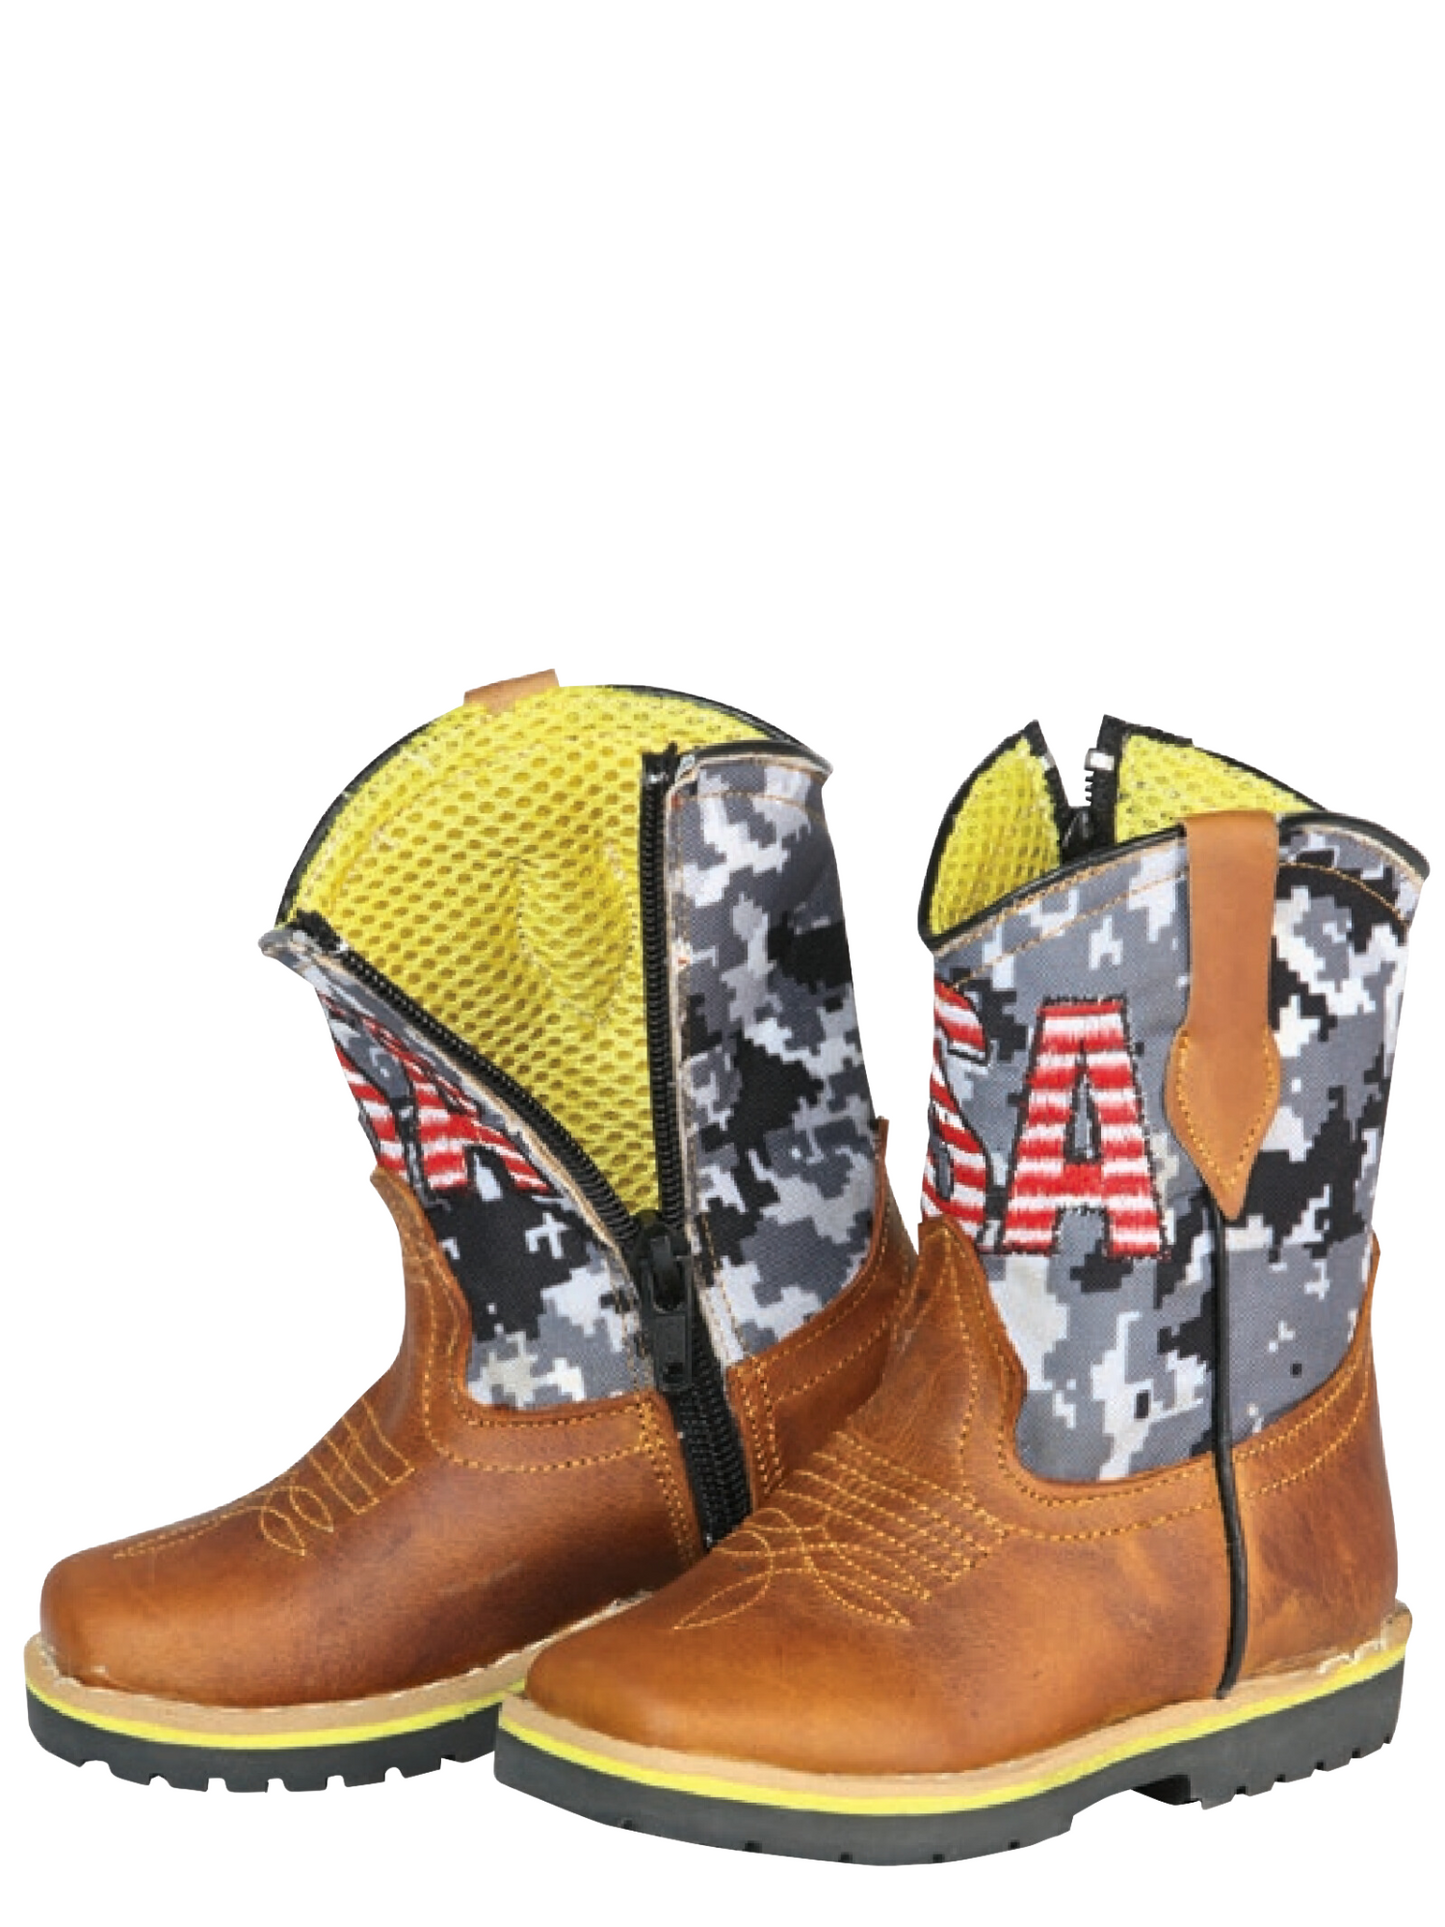 Kids - Classic Genuine Leather Rodeo Cowboy Boots for Babies 'Jar Boots' - ID: 126573 Cowboy Boots Jar Boots